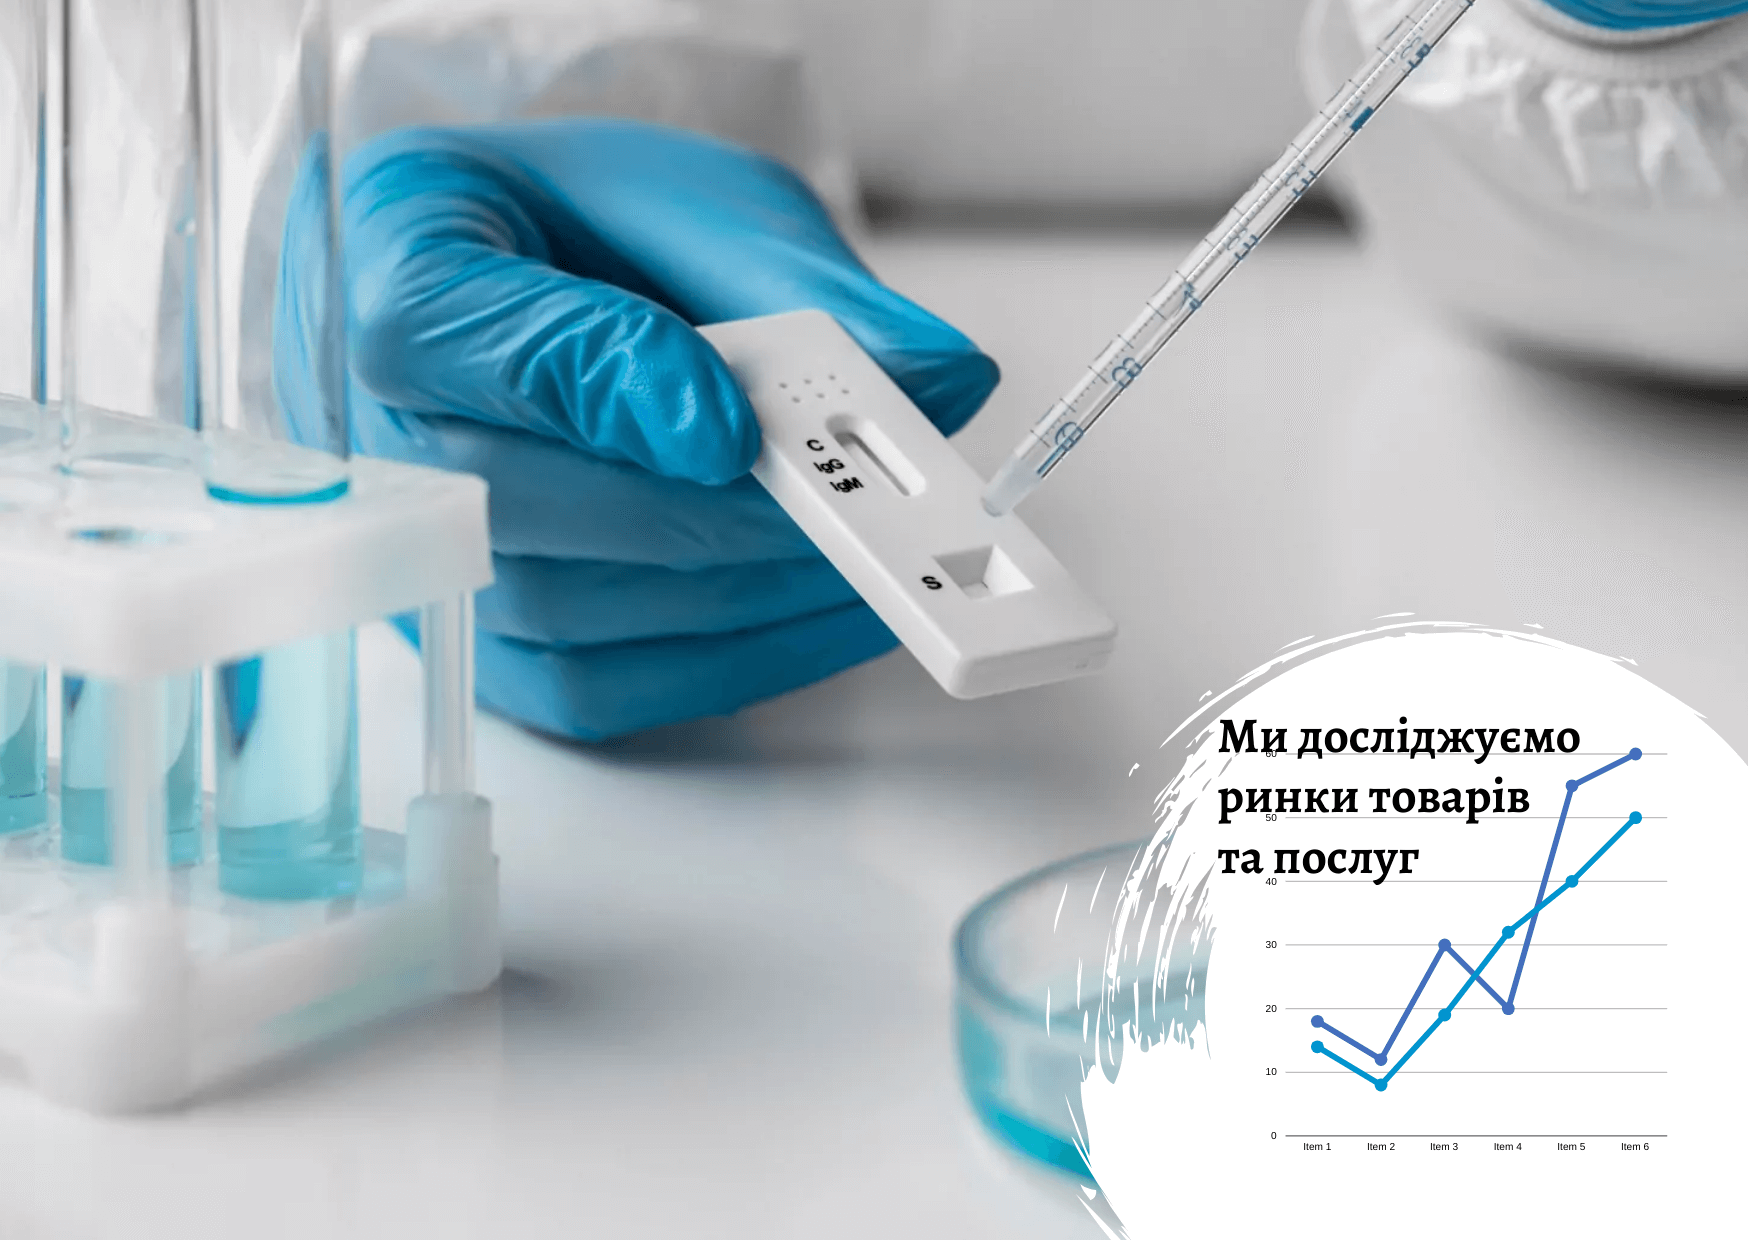 Ukrainian reagents for PCR testing market: state after lifting anti-Covid restrictions 